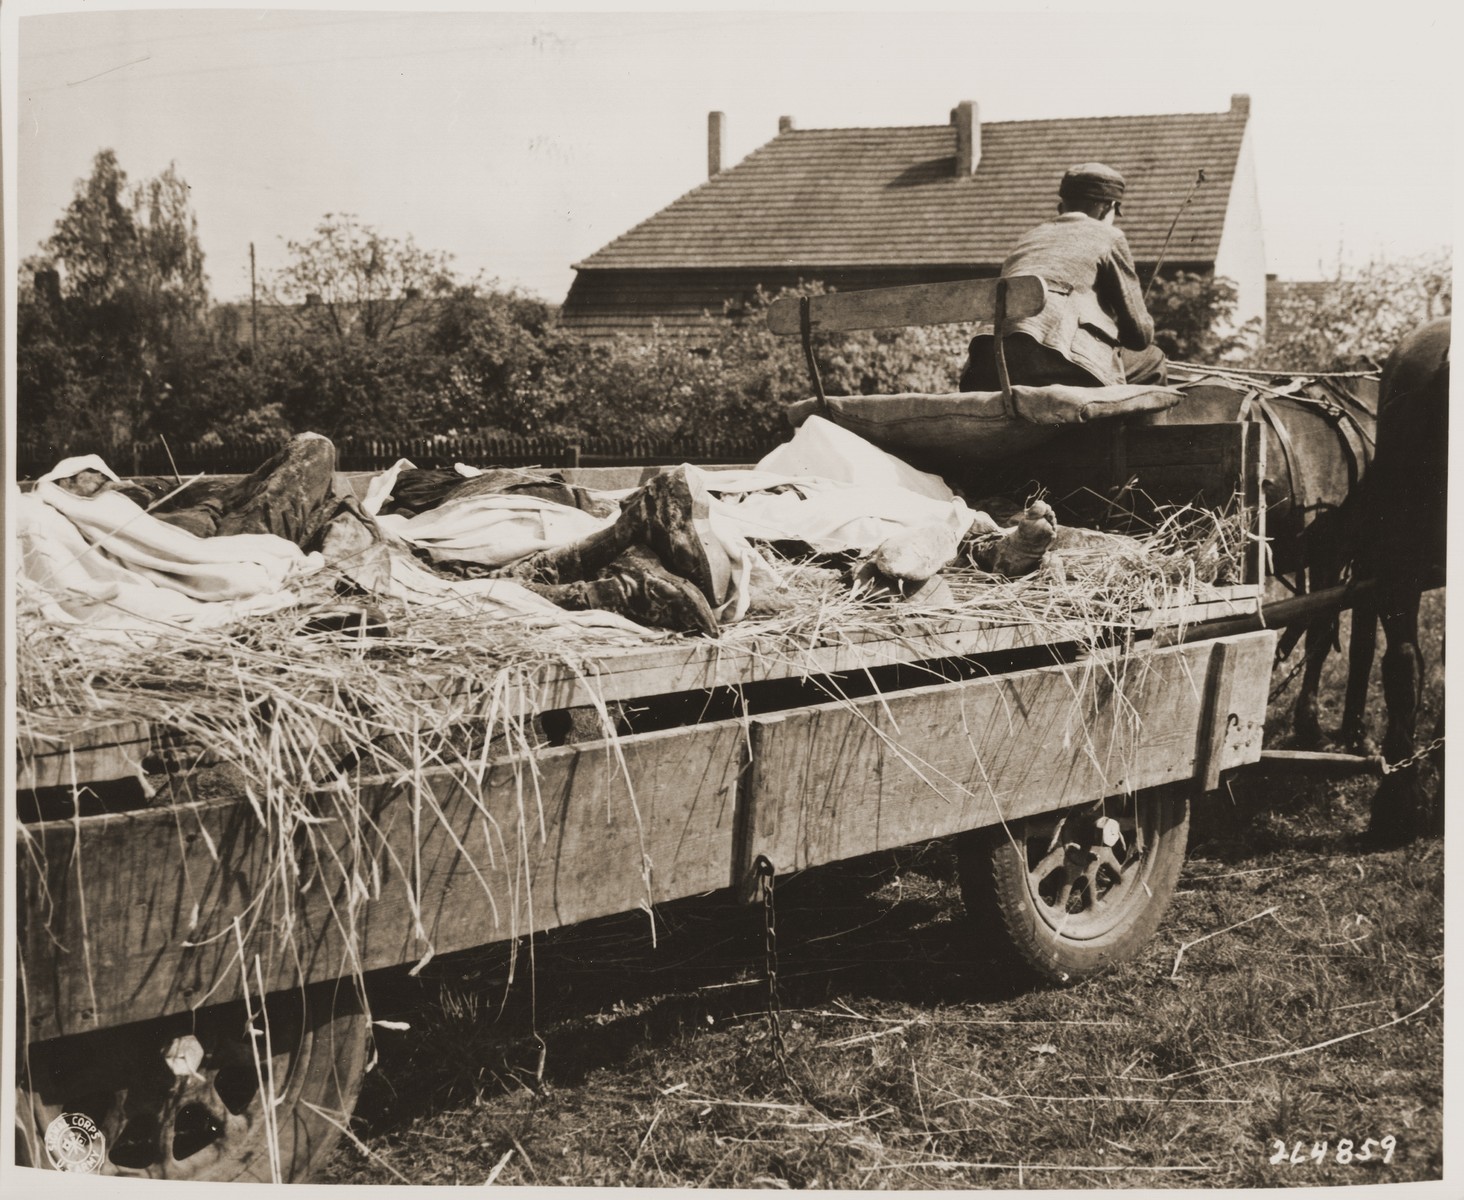 A German civilian transports the recently exhumed corpses of prisoners to a nearby site where they will be reburied.